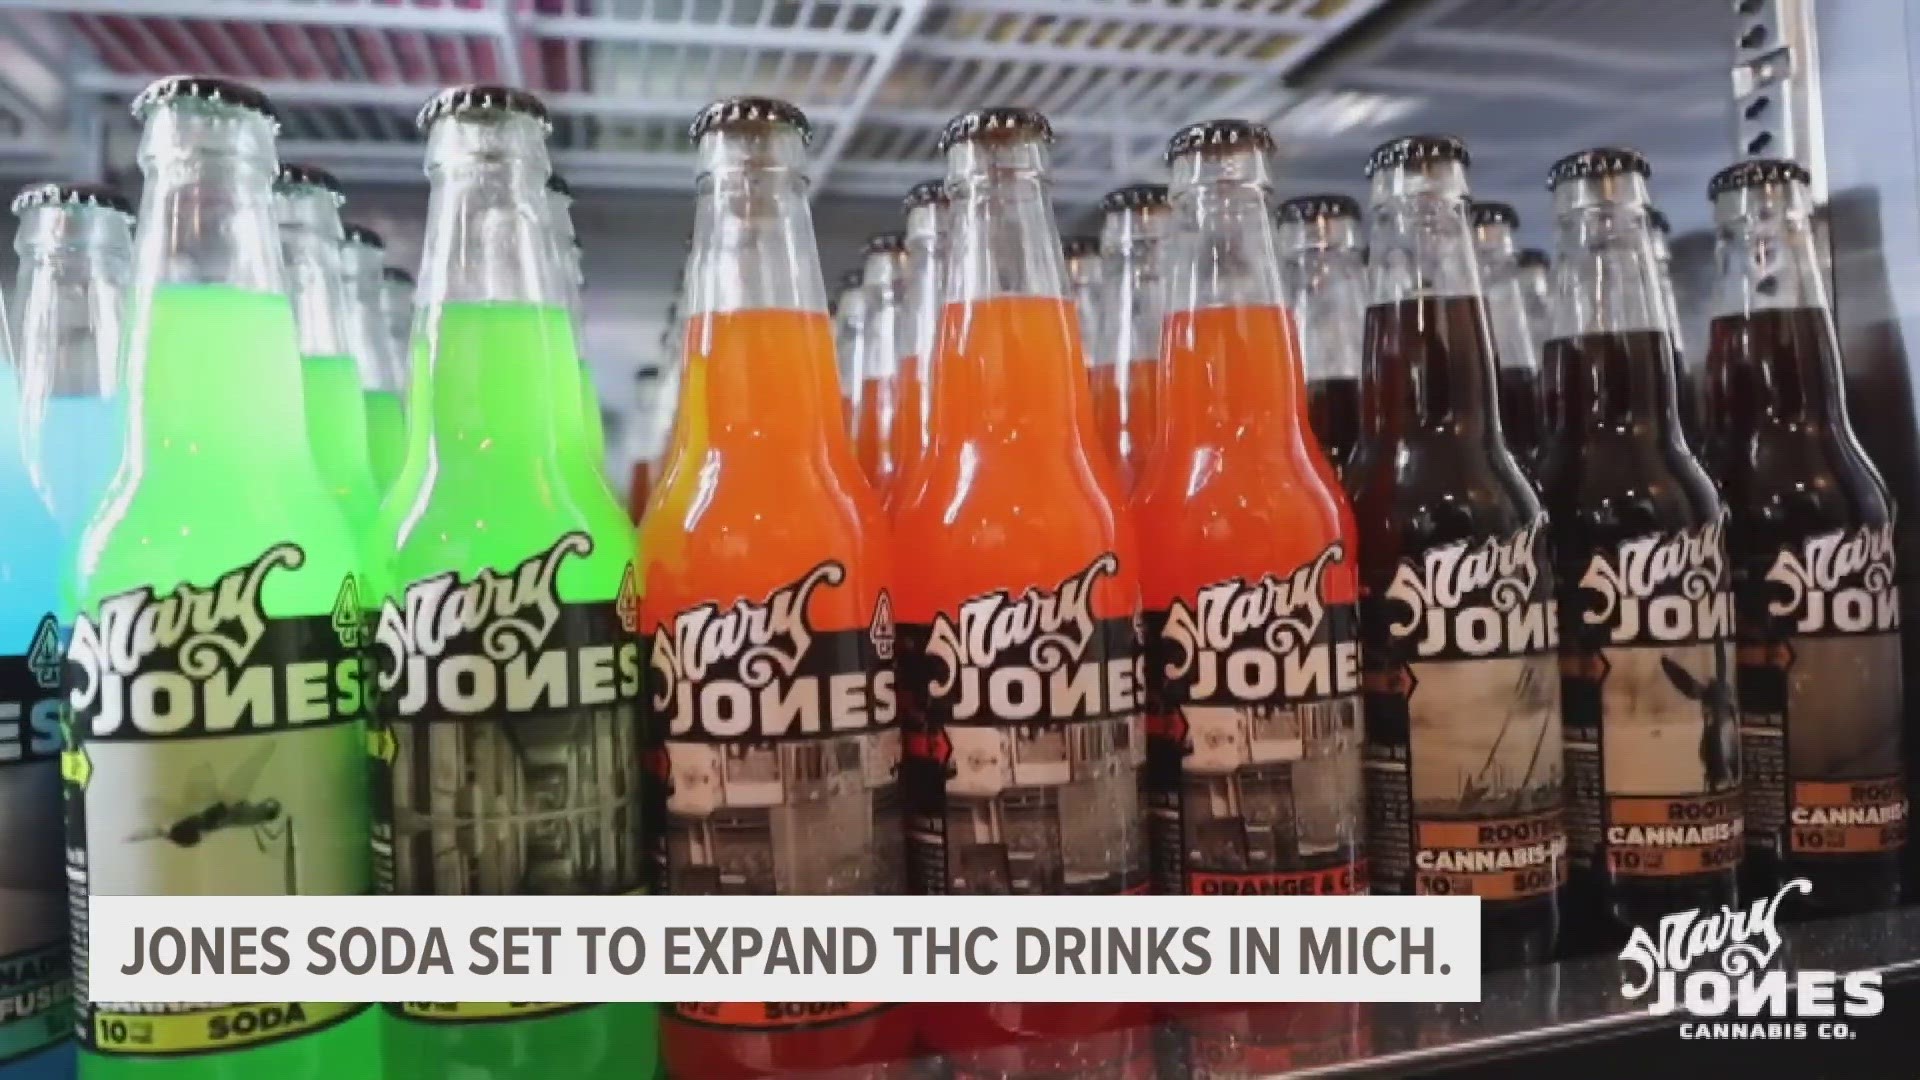 Known as Mary Jones Soda, the drinks will be available this summer in four different flavors.